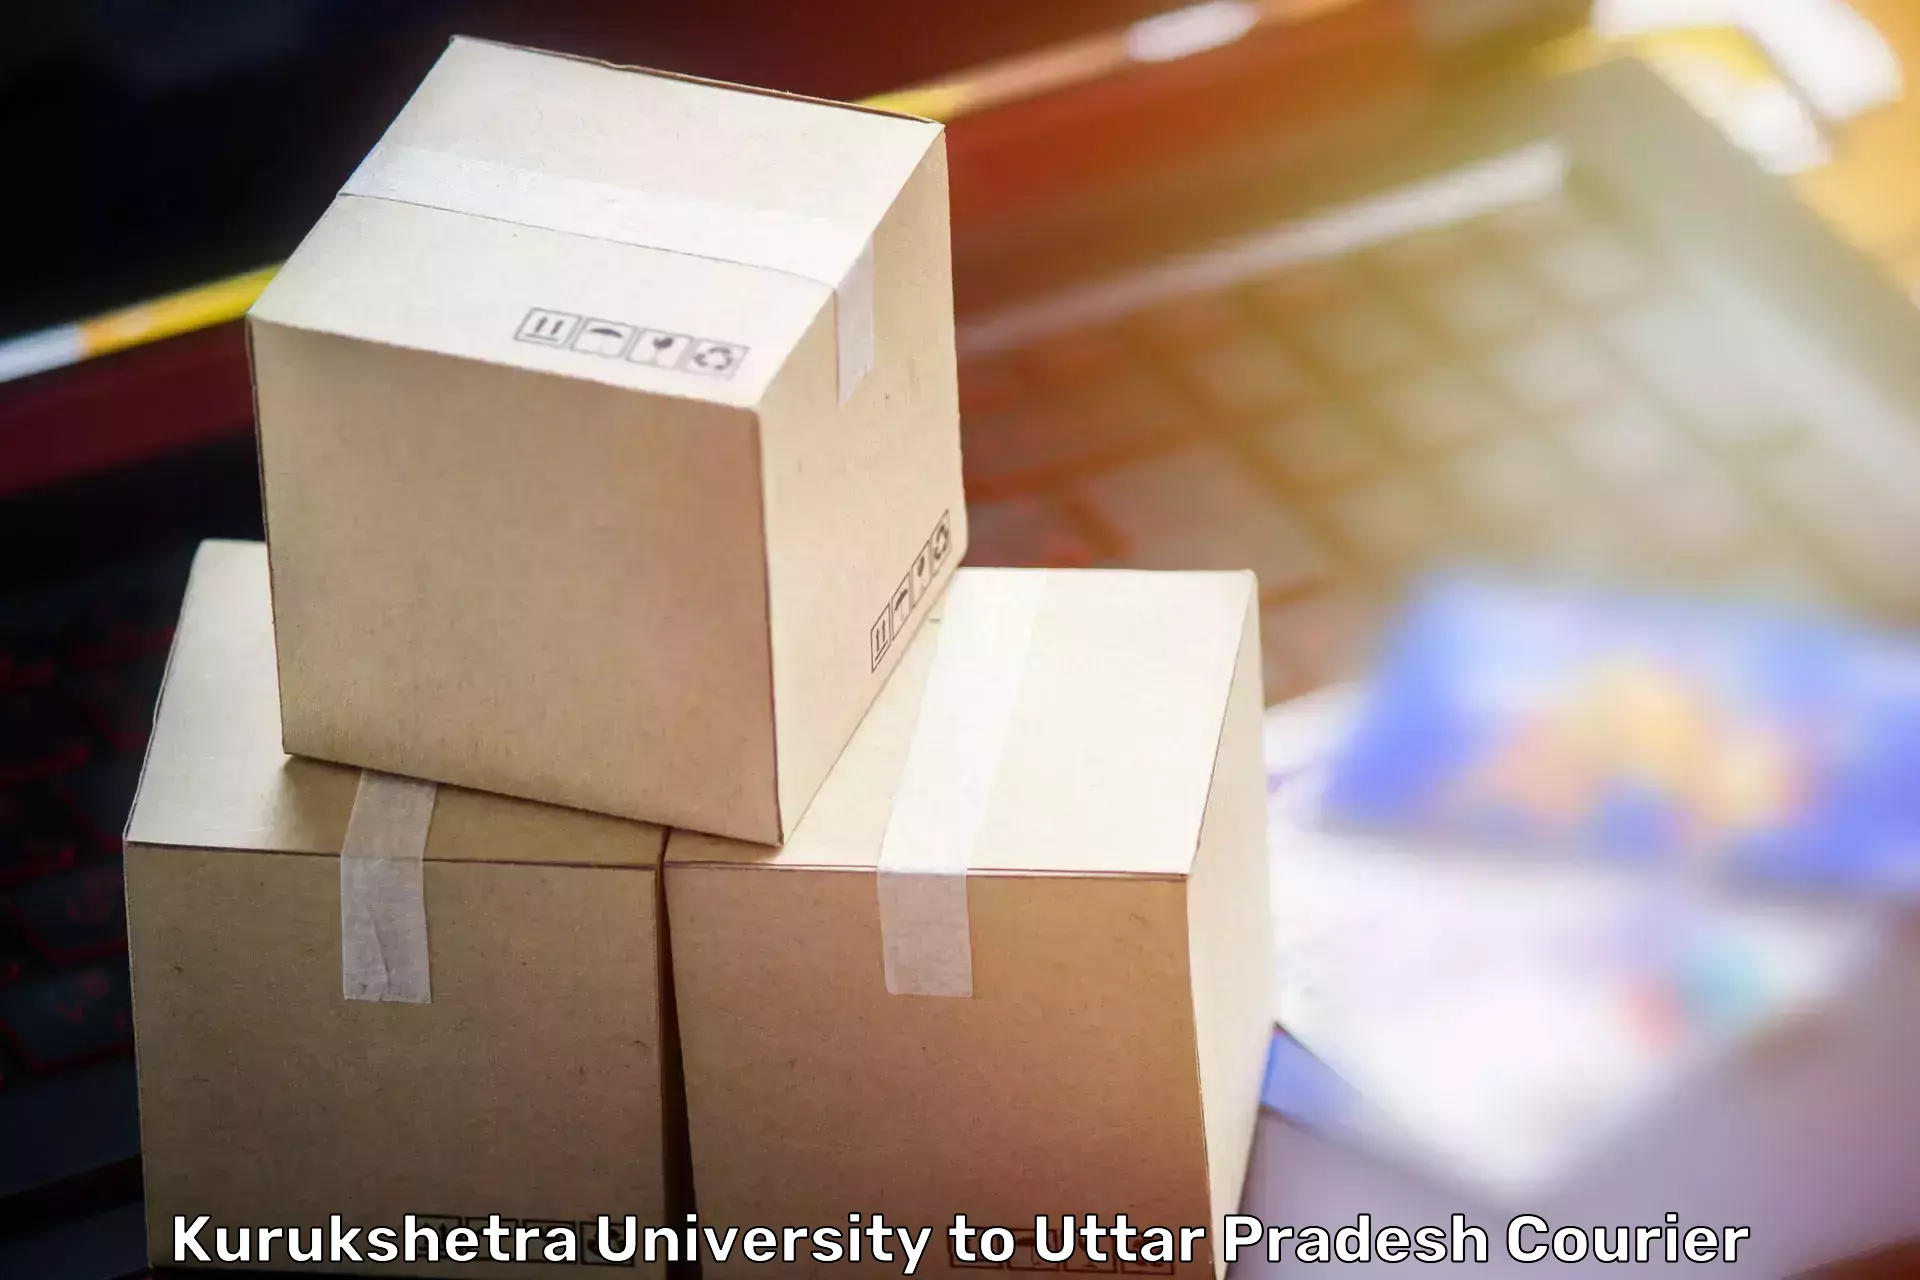 Professional movers and packers Kurukshetra University to Sultanpur